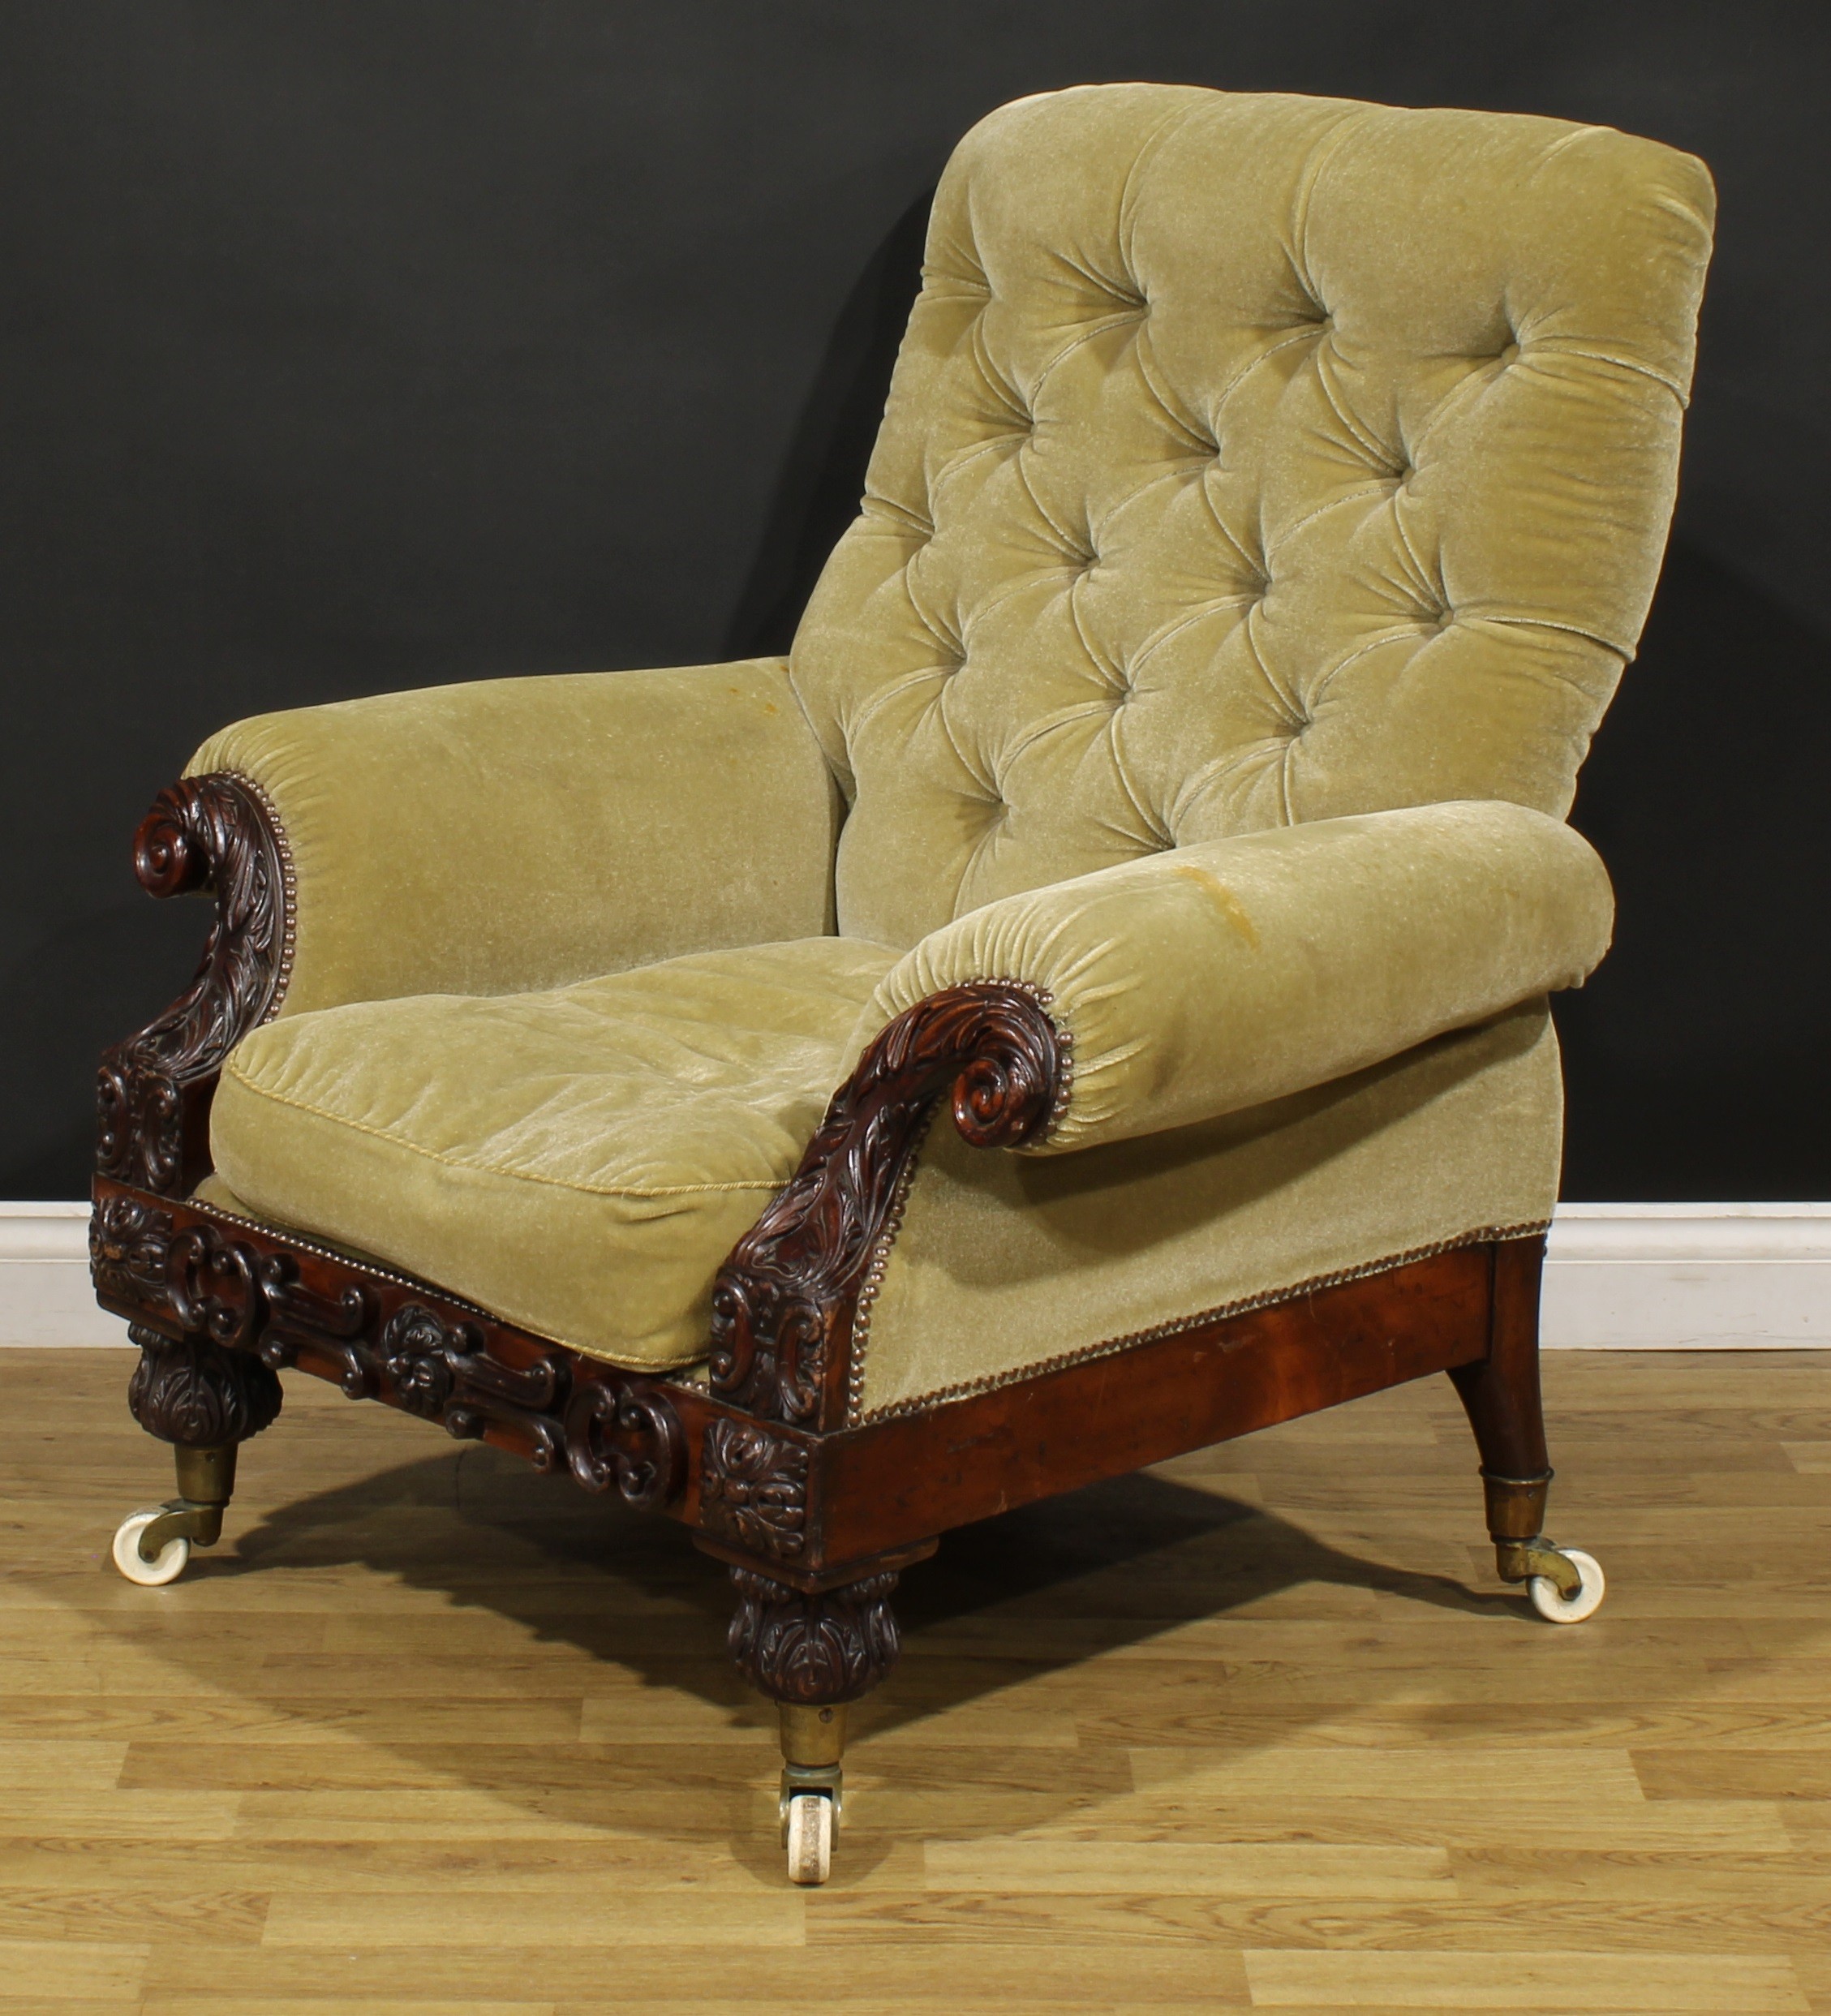 A substantial 19th century mahogany lyre-form library chair, in the manner of Gillows of Lancaster - Image 3 of 4